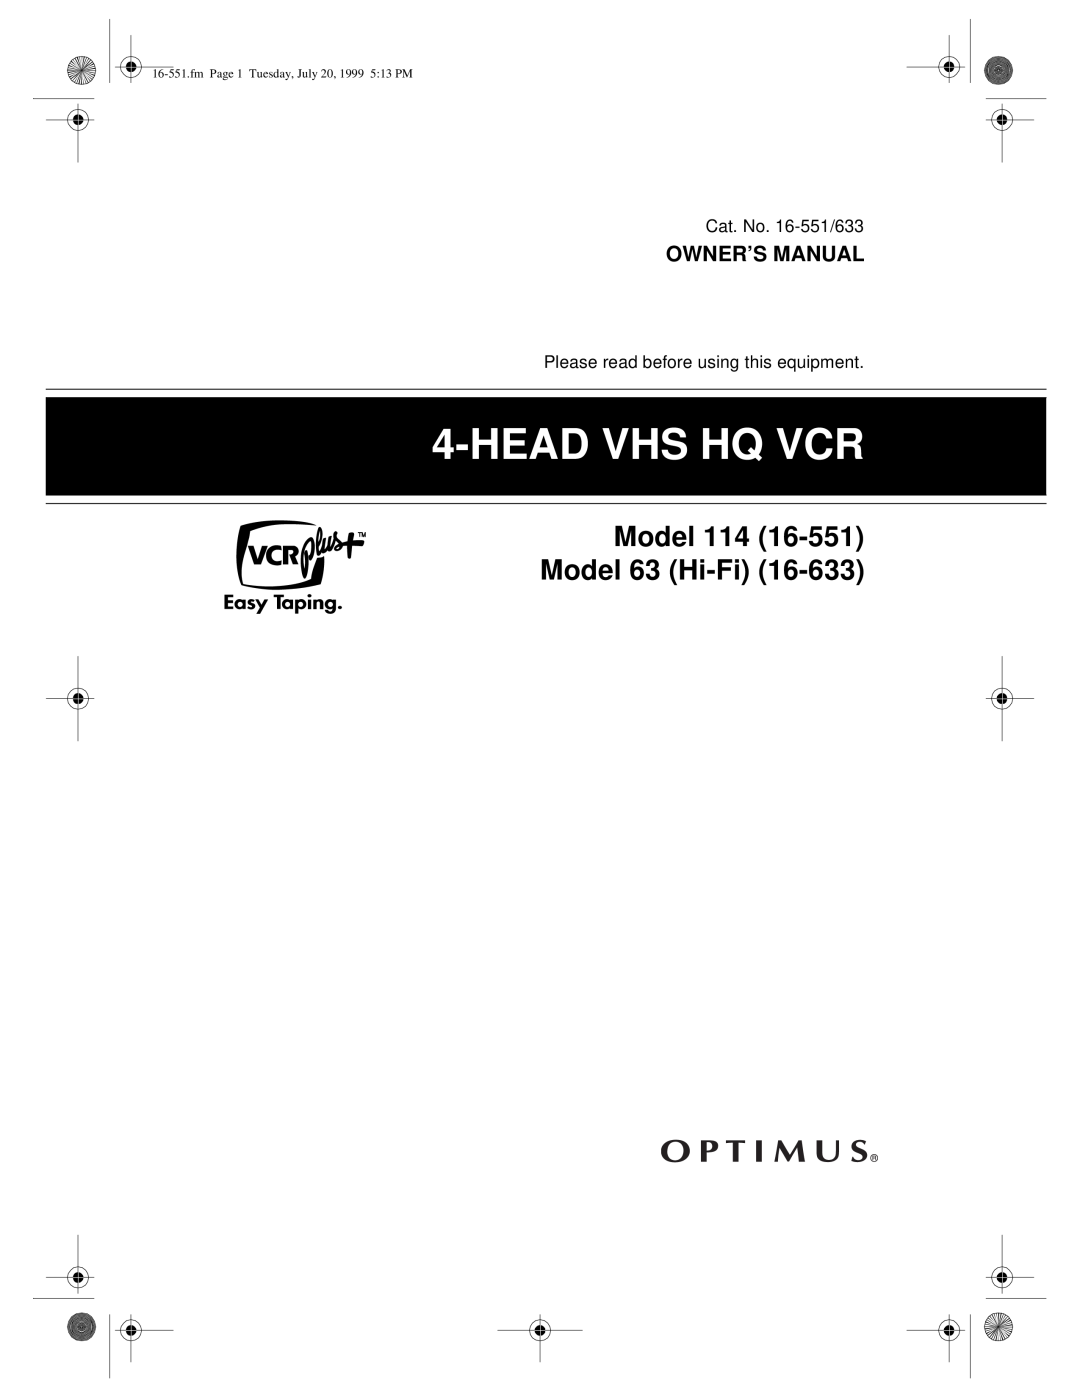 Optimus owner manual Model 114 Model 63 Hi-Fi, Owner’S Manual, Head Vhs Hq Vcr, fm Page 1 Tuesday, July 20, 1999 513 PM 